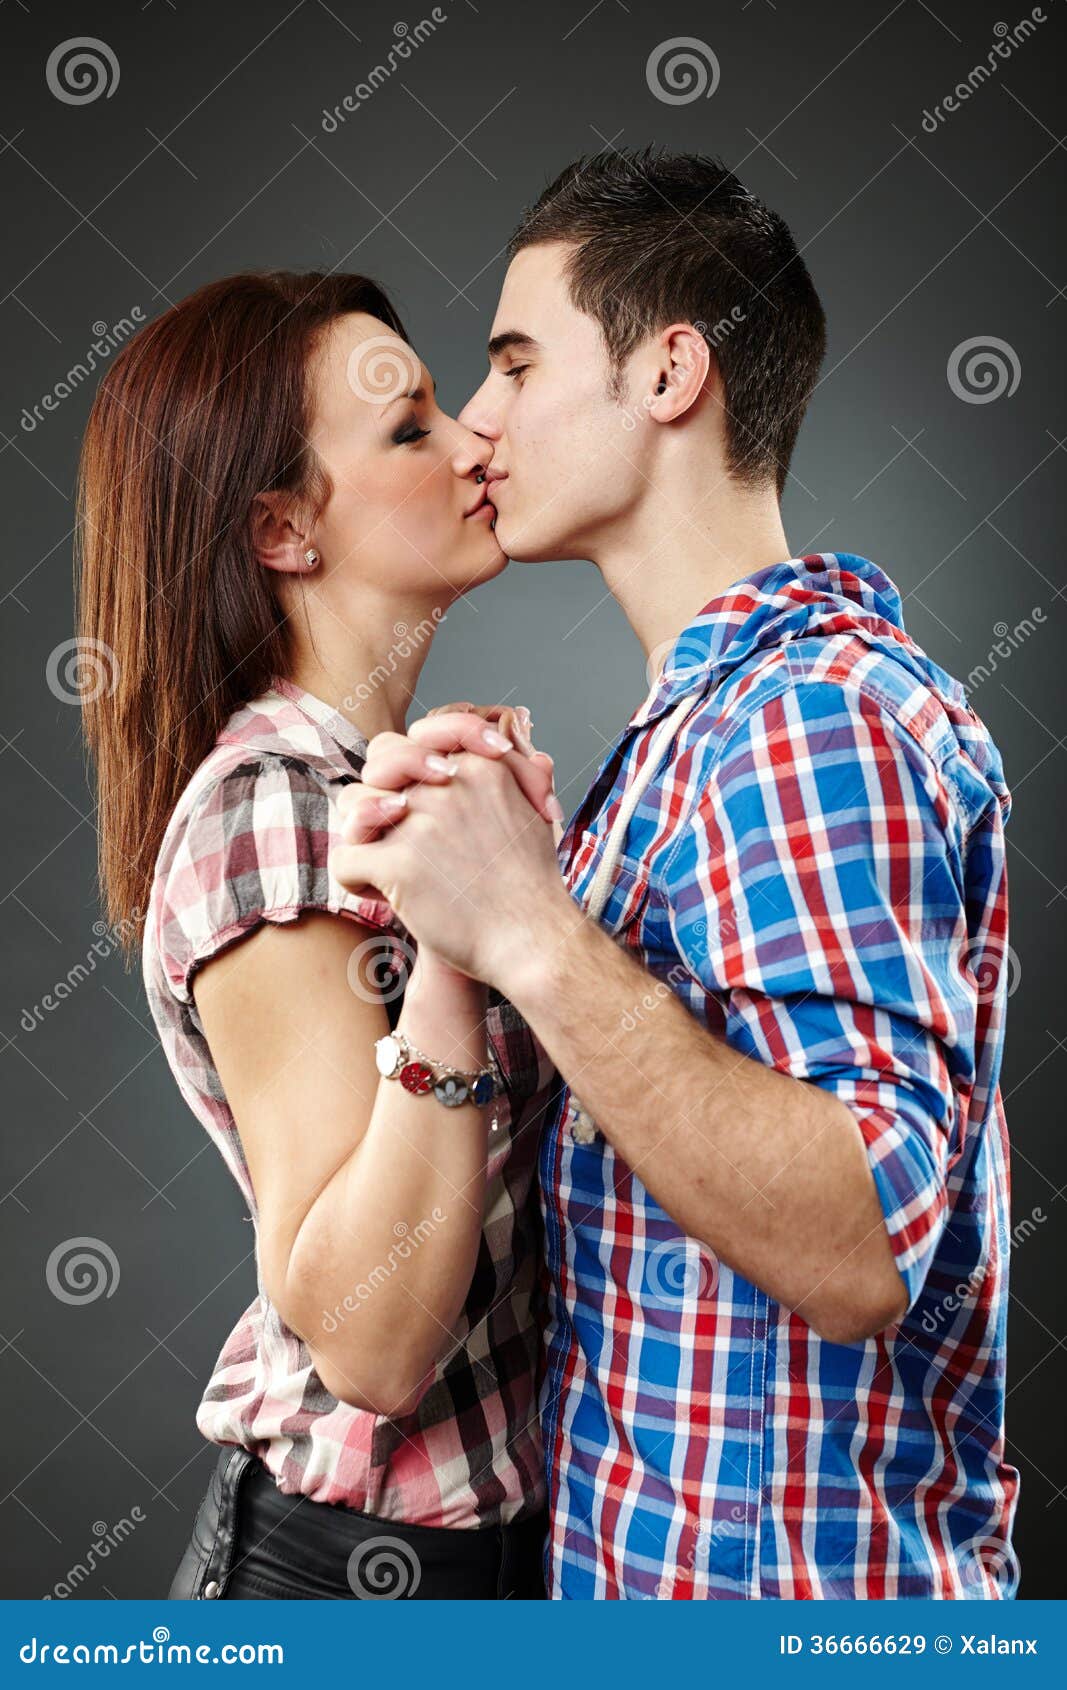 Hot Sexy Couple Love Close Each Other Erotic Pose Kissing Stock Photo by  ©xerox123.mail.ua 132171778